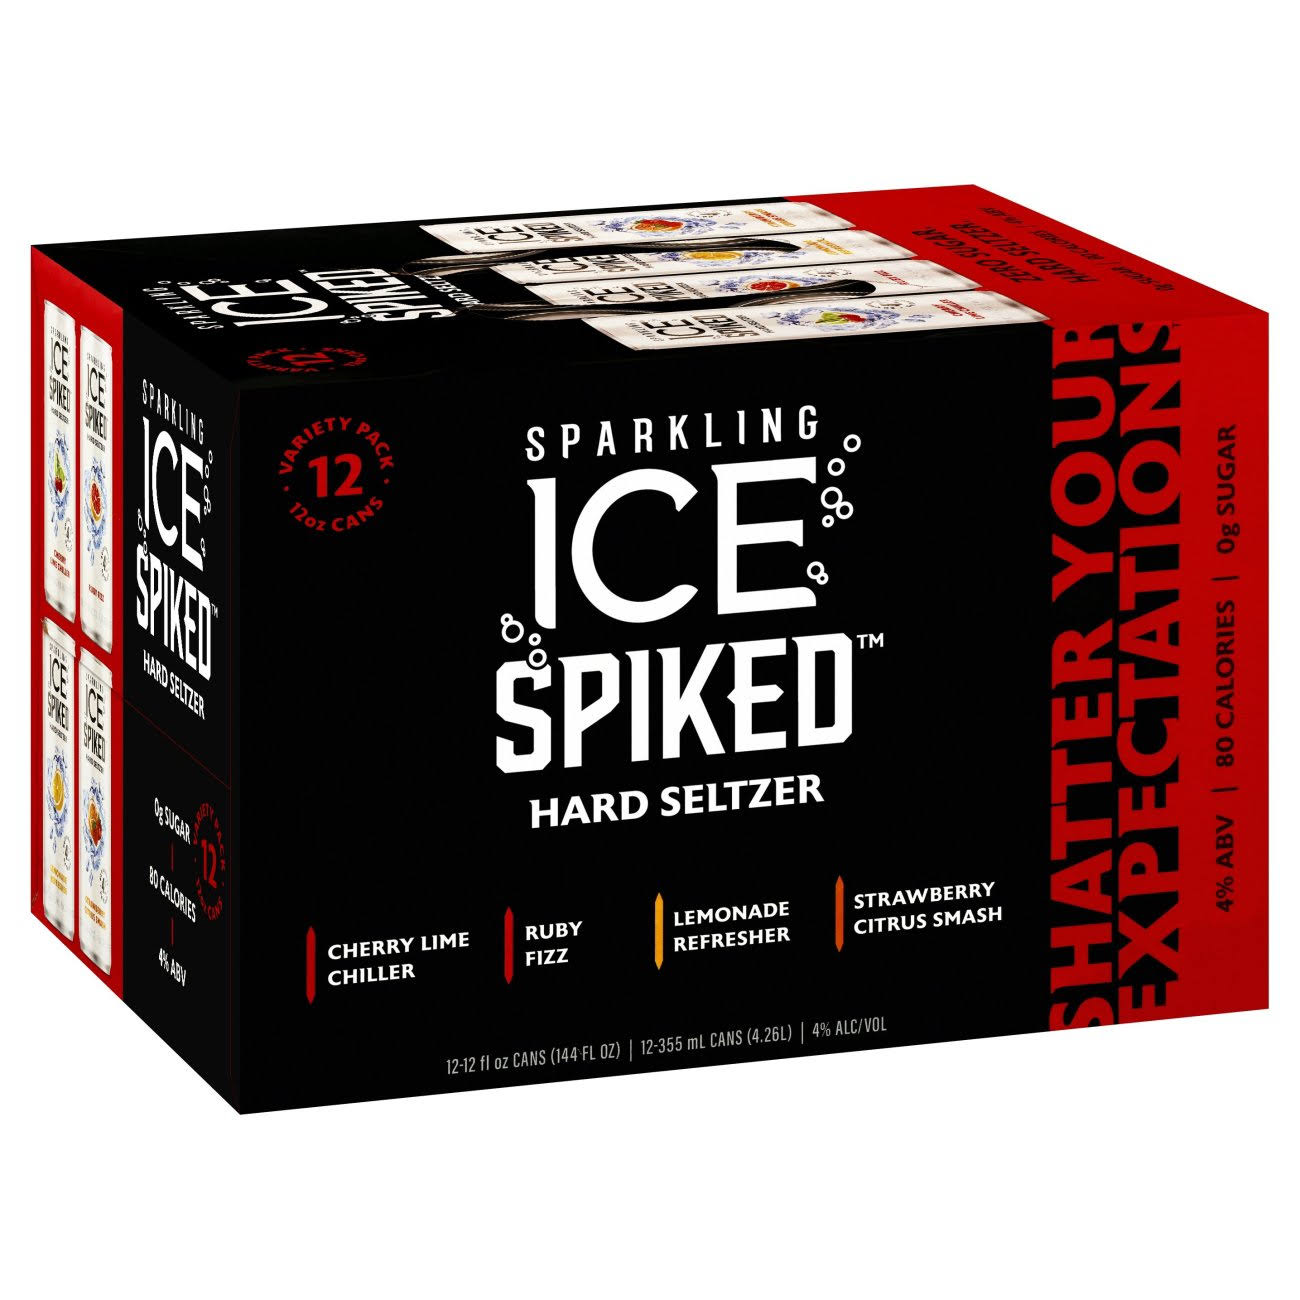 Sparkling Ice Spiked Hard Seltzer, Variety Pack - 12 pack, 12 fl oz cans